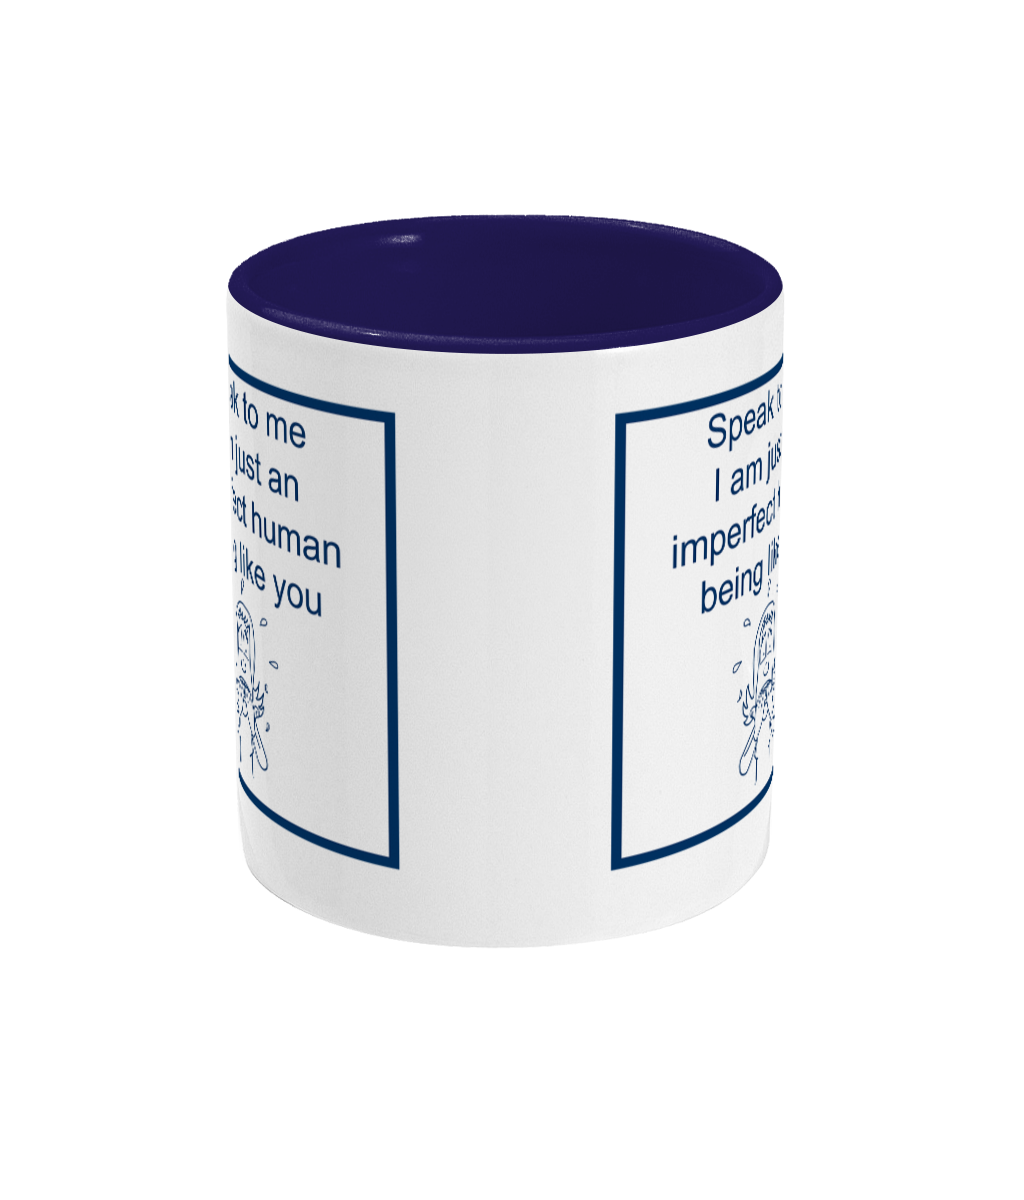 two tone blue and white ceramic mug speak to me I am just an imperfect human being like you 